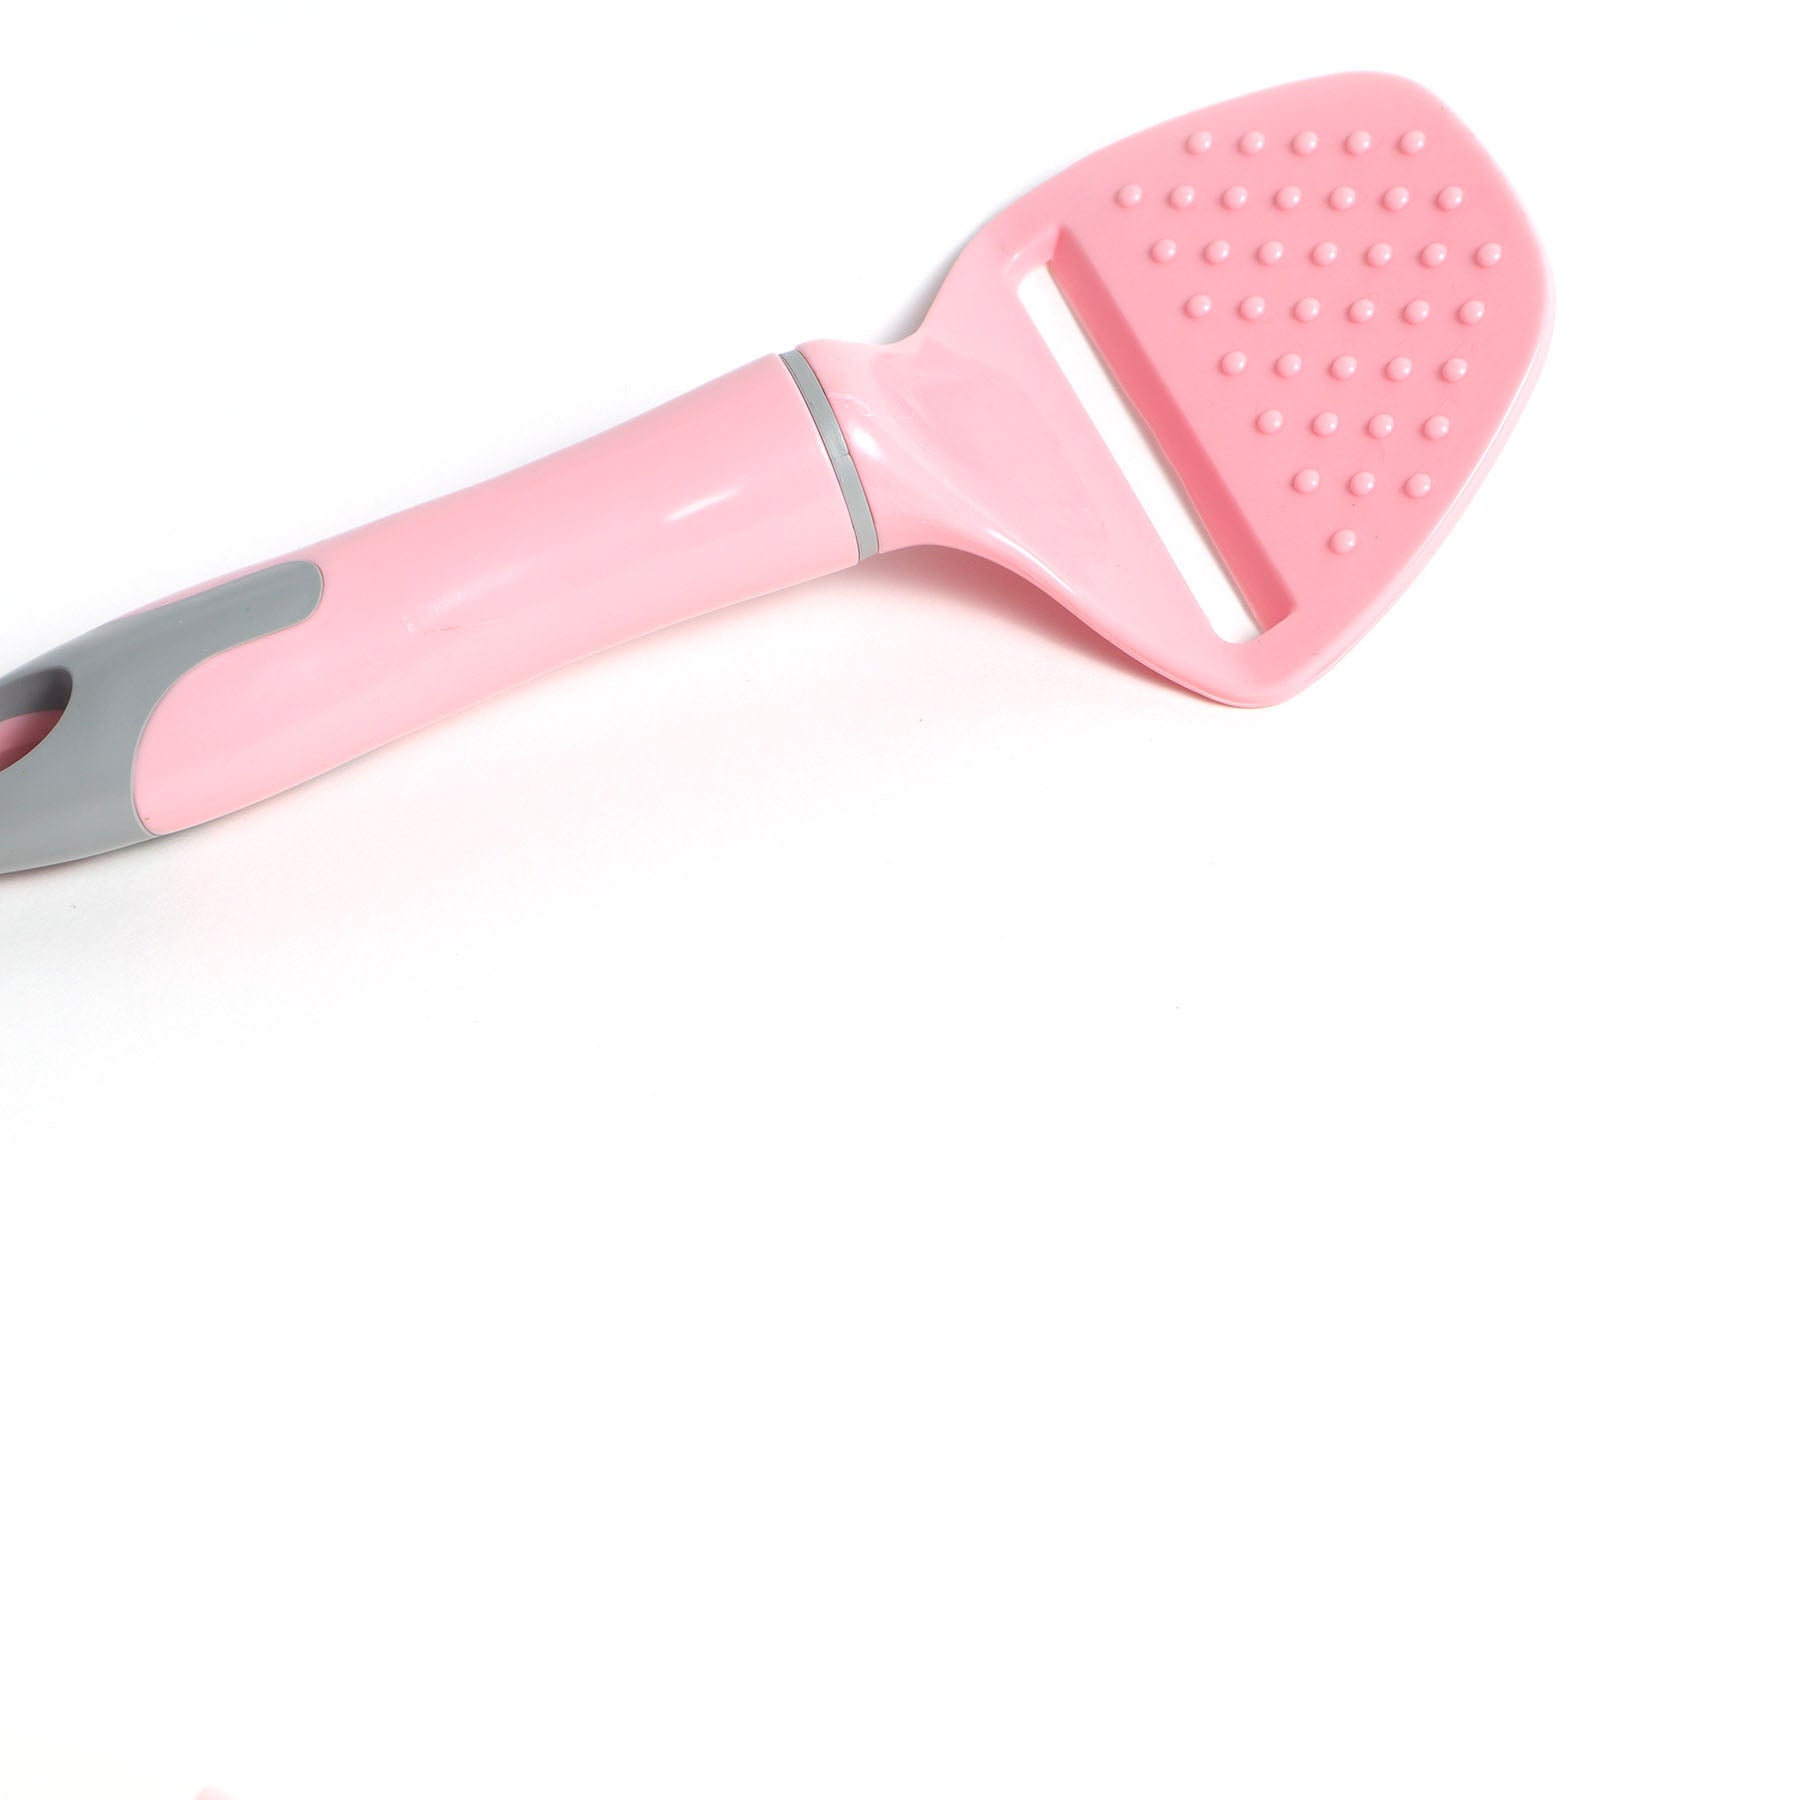 All - in - One Pizza Kit Pink